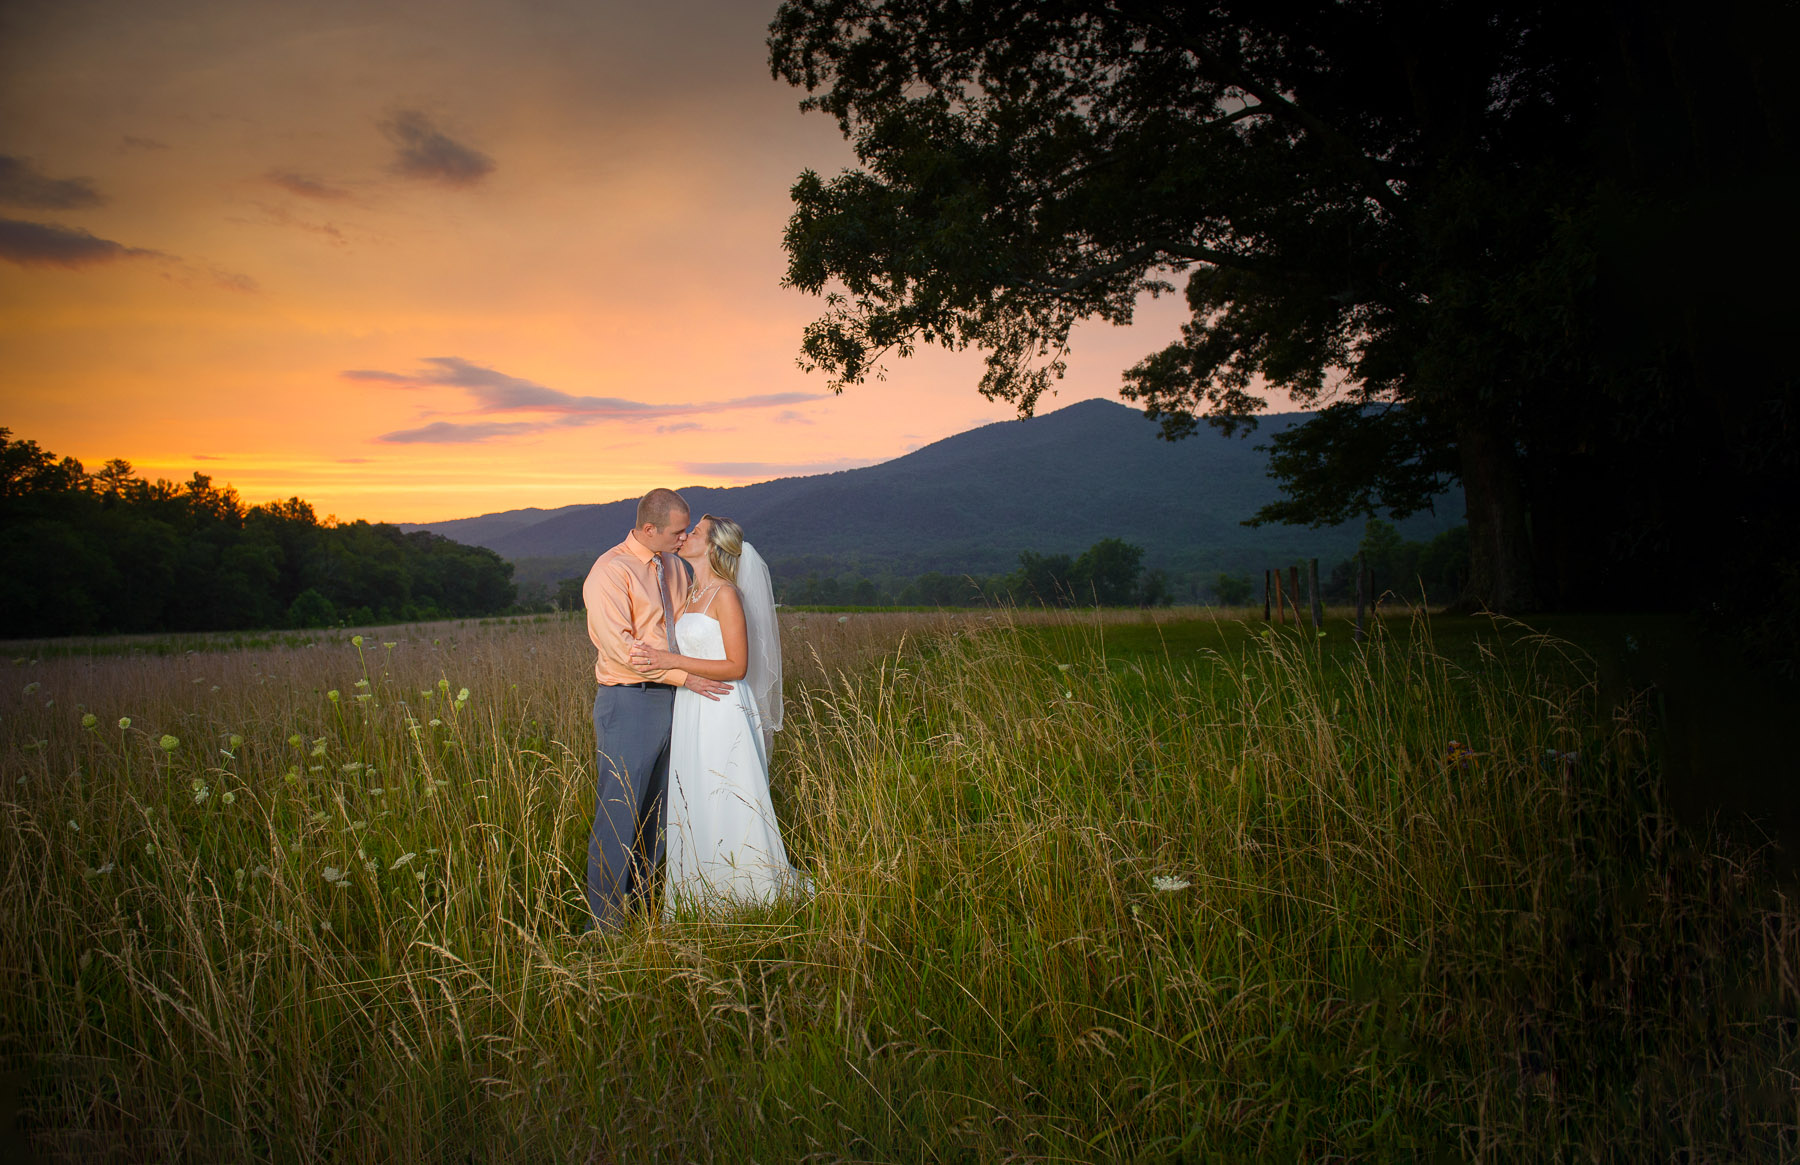 Cades Cove wedding and Elopement packages at LeQuire Field overlook